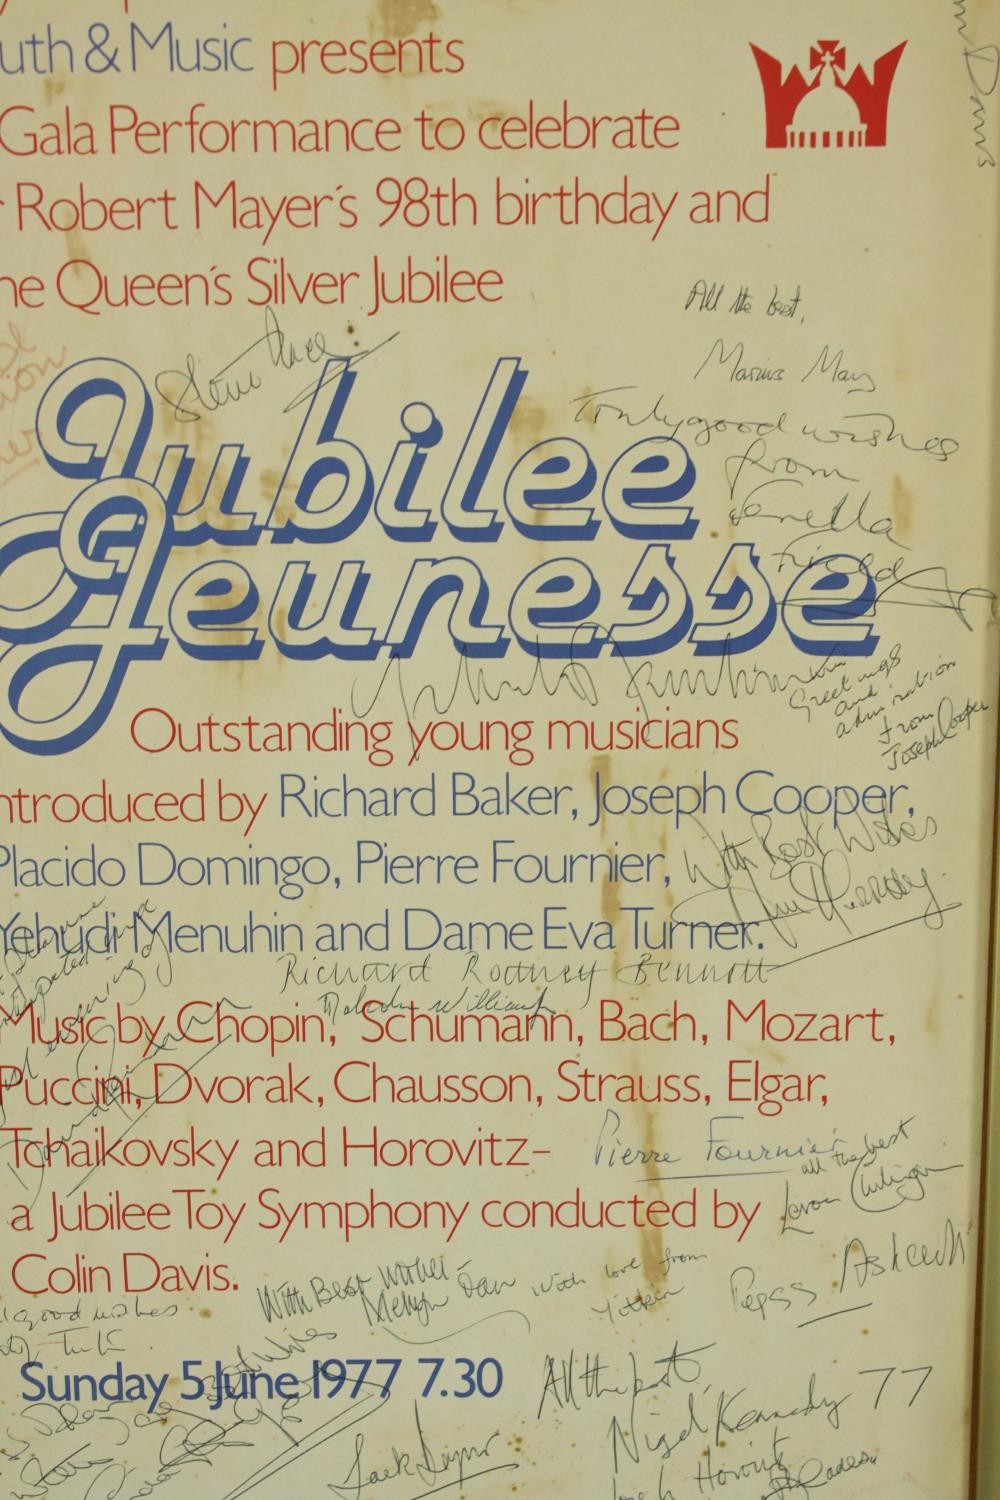 Jubilee opera poster Jun. 06, 1977. To celebrate the 98th birthday of Robert Mayer. Mayer was the